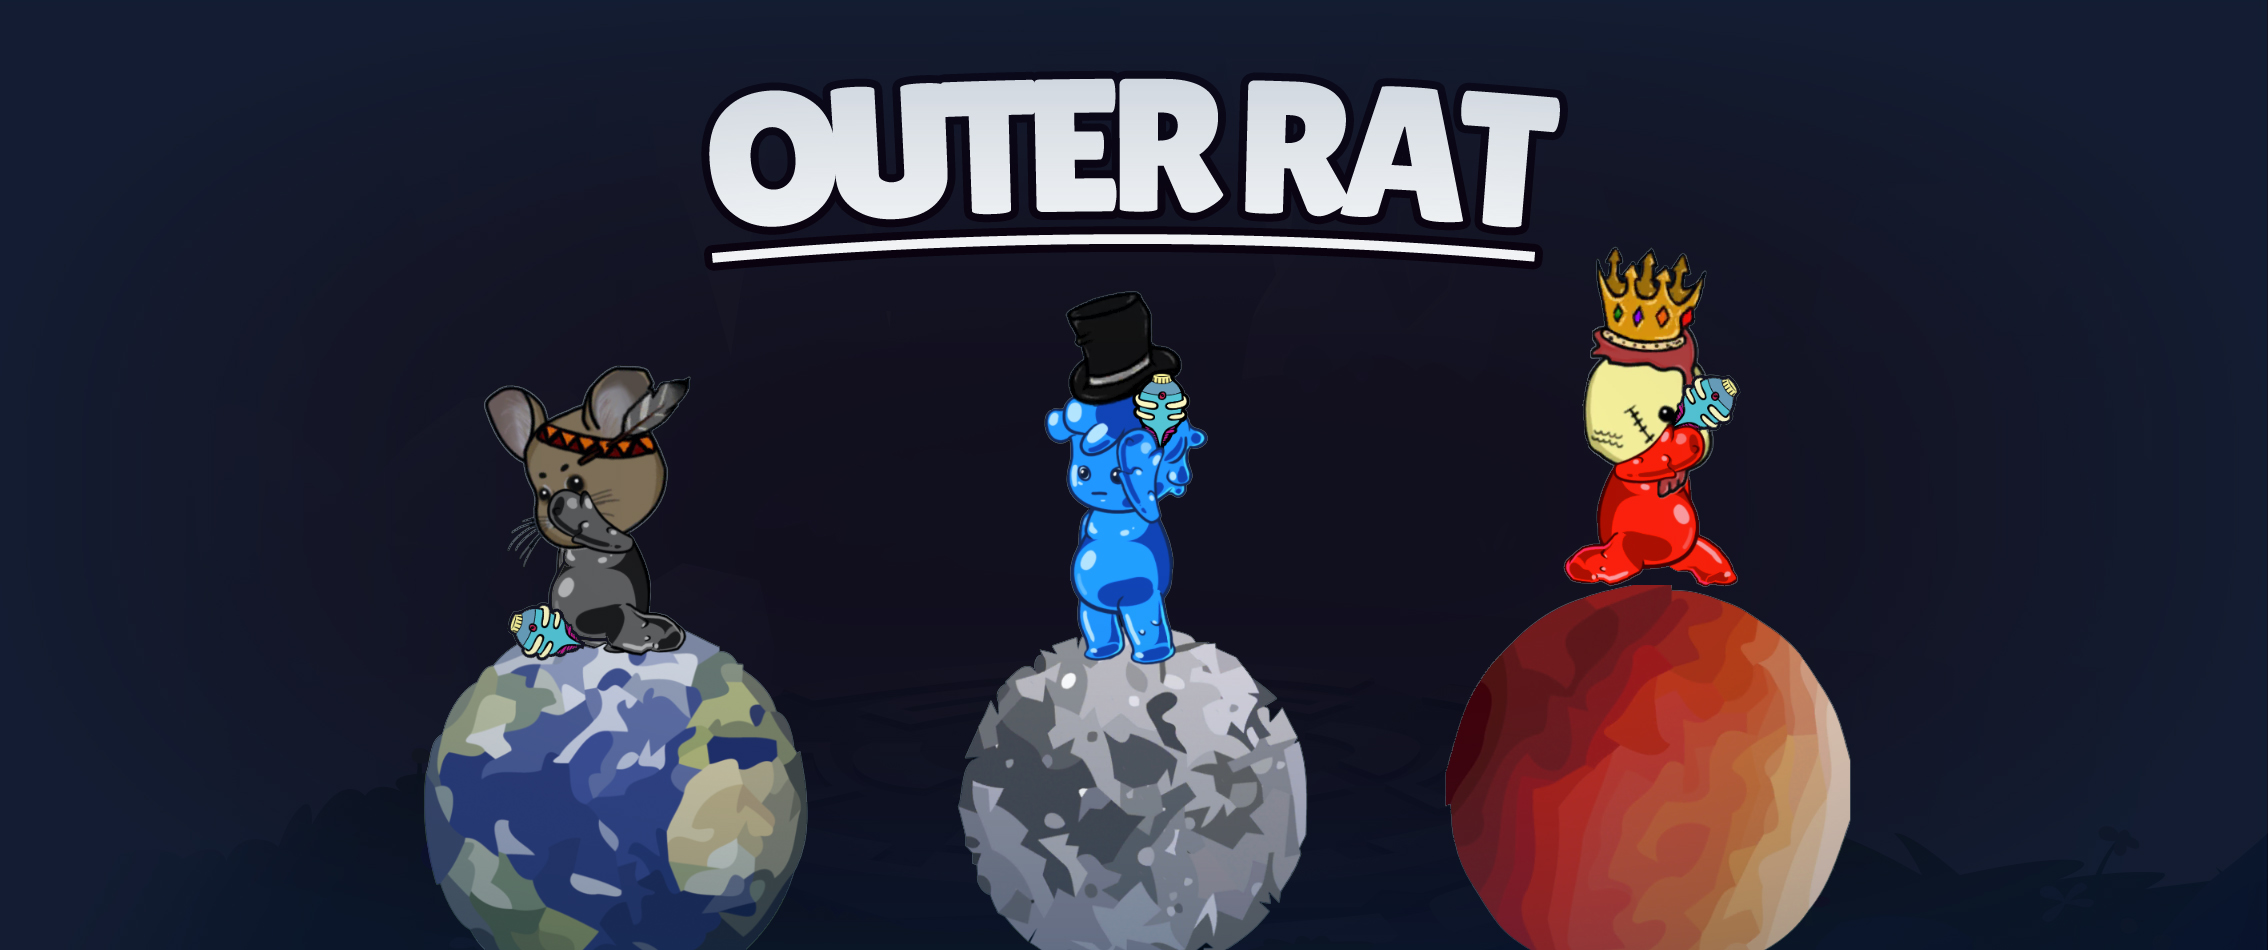 Outer Rat - Impostor & Detective